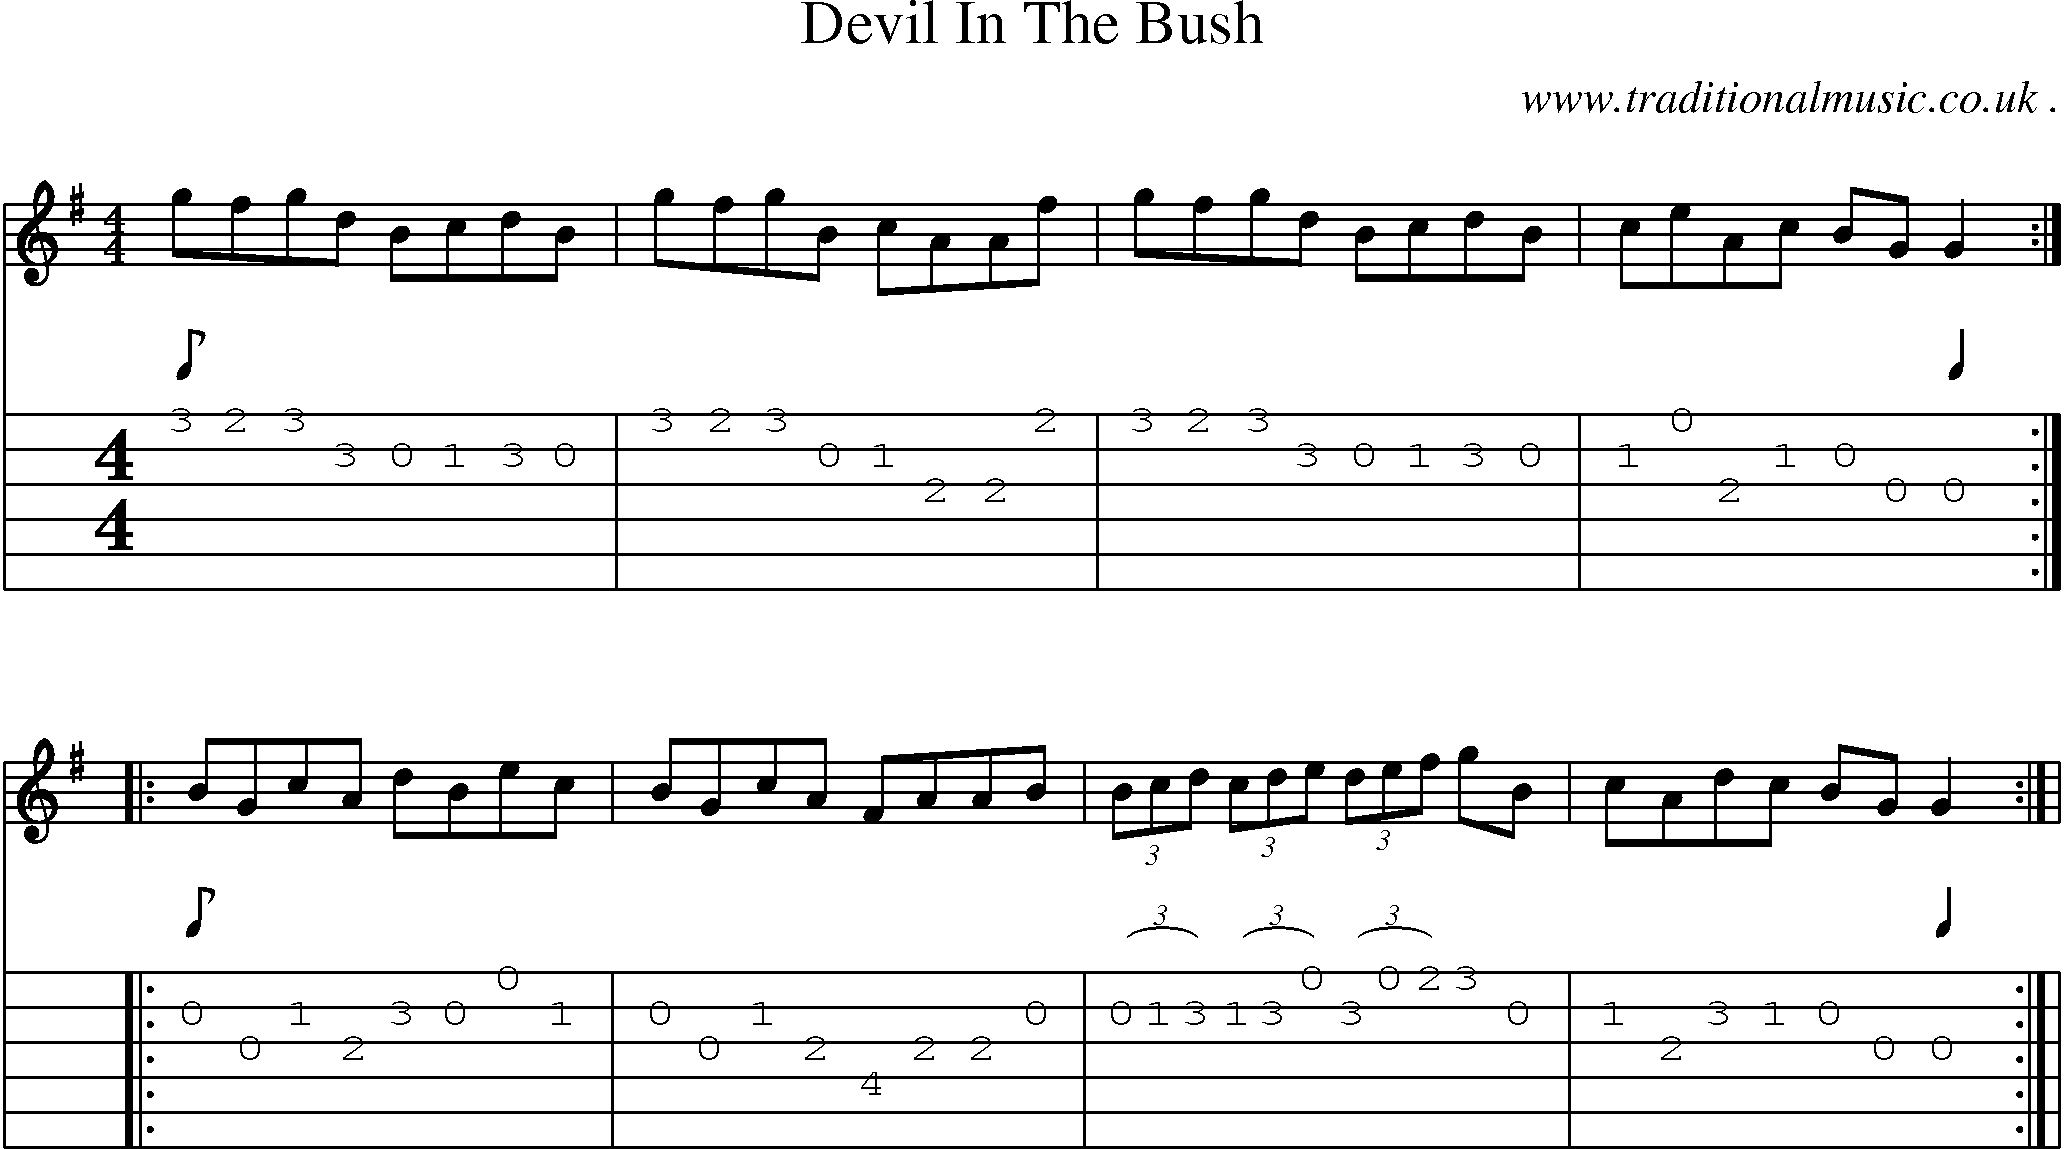 Sheet-Music and Guitar Tabs for Devil In The Bush